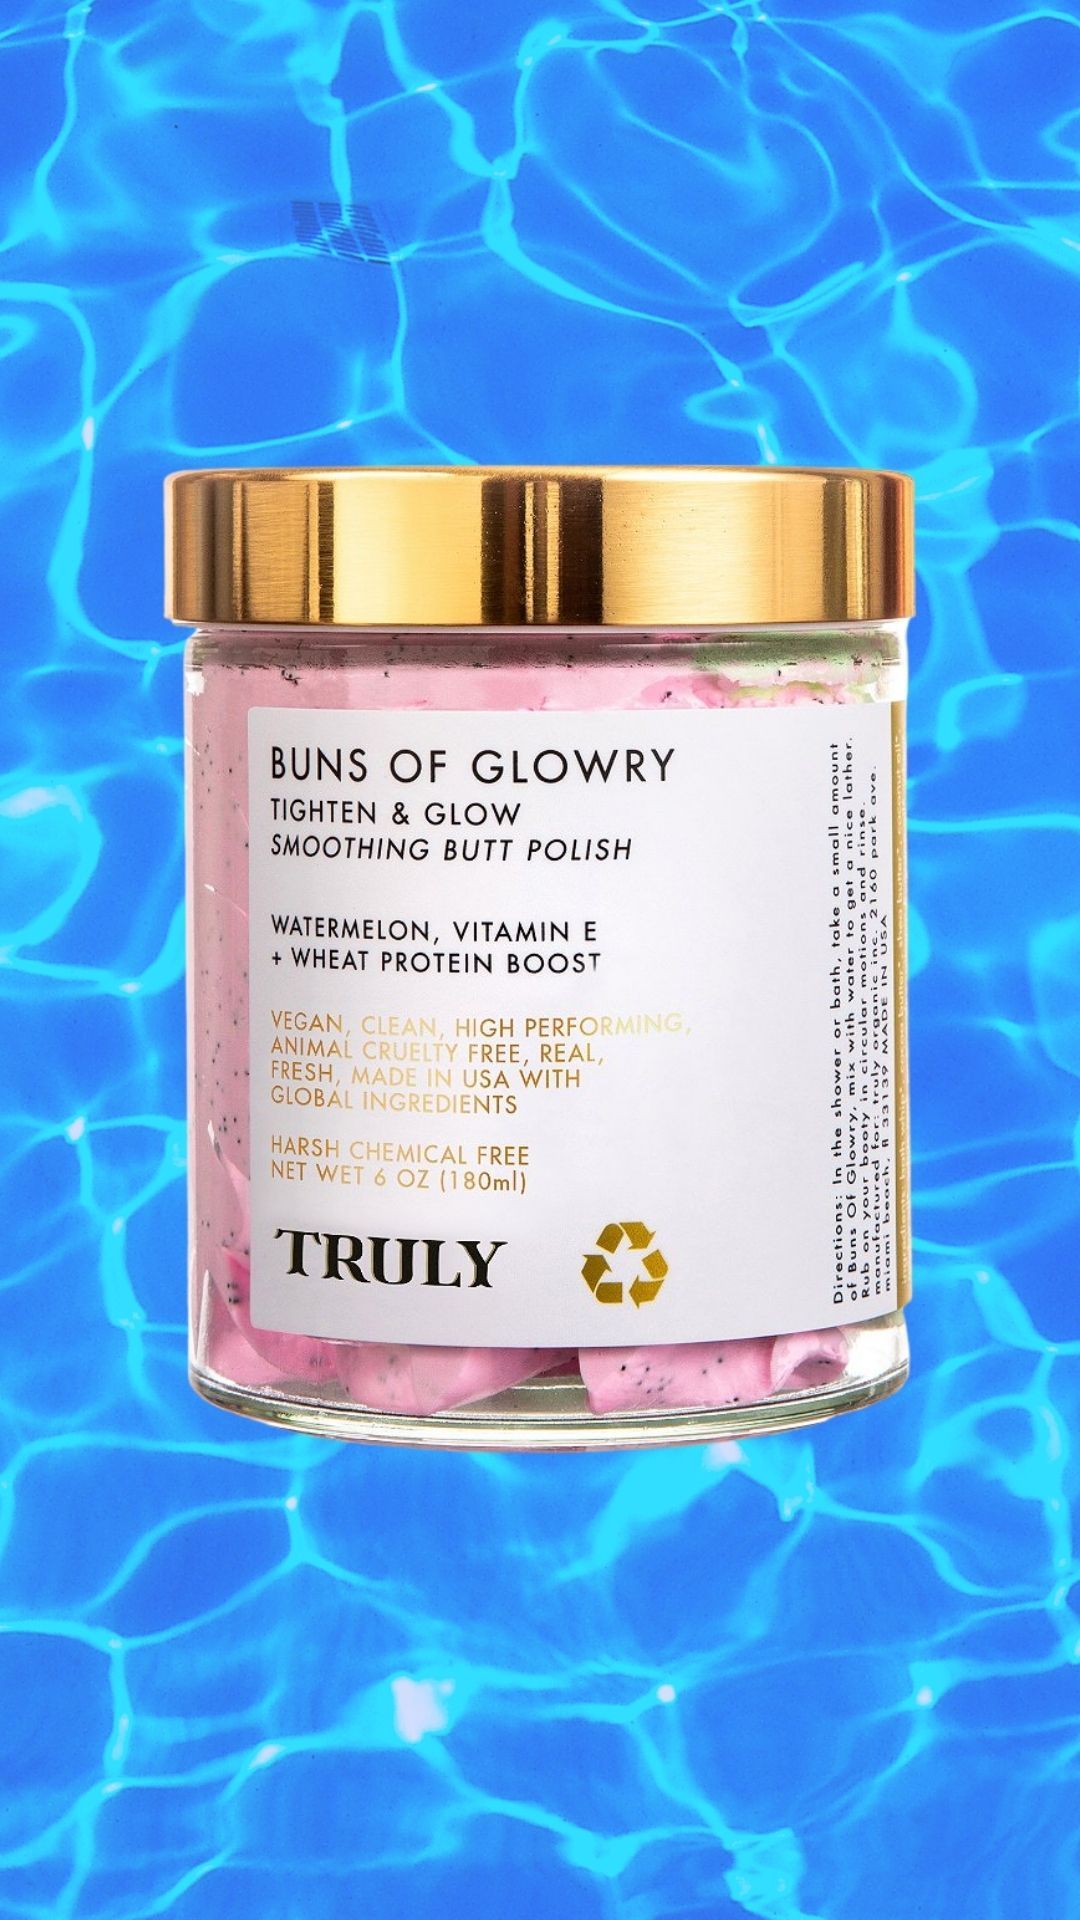 Truly Beauty Buns of Glowry Tighten & Glow Smoothing Butt Polish